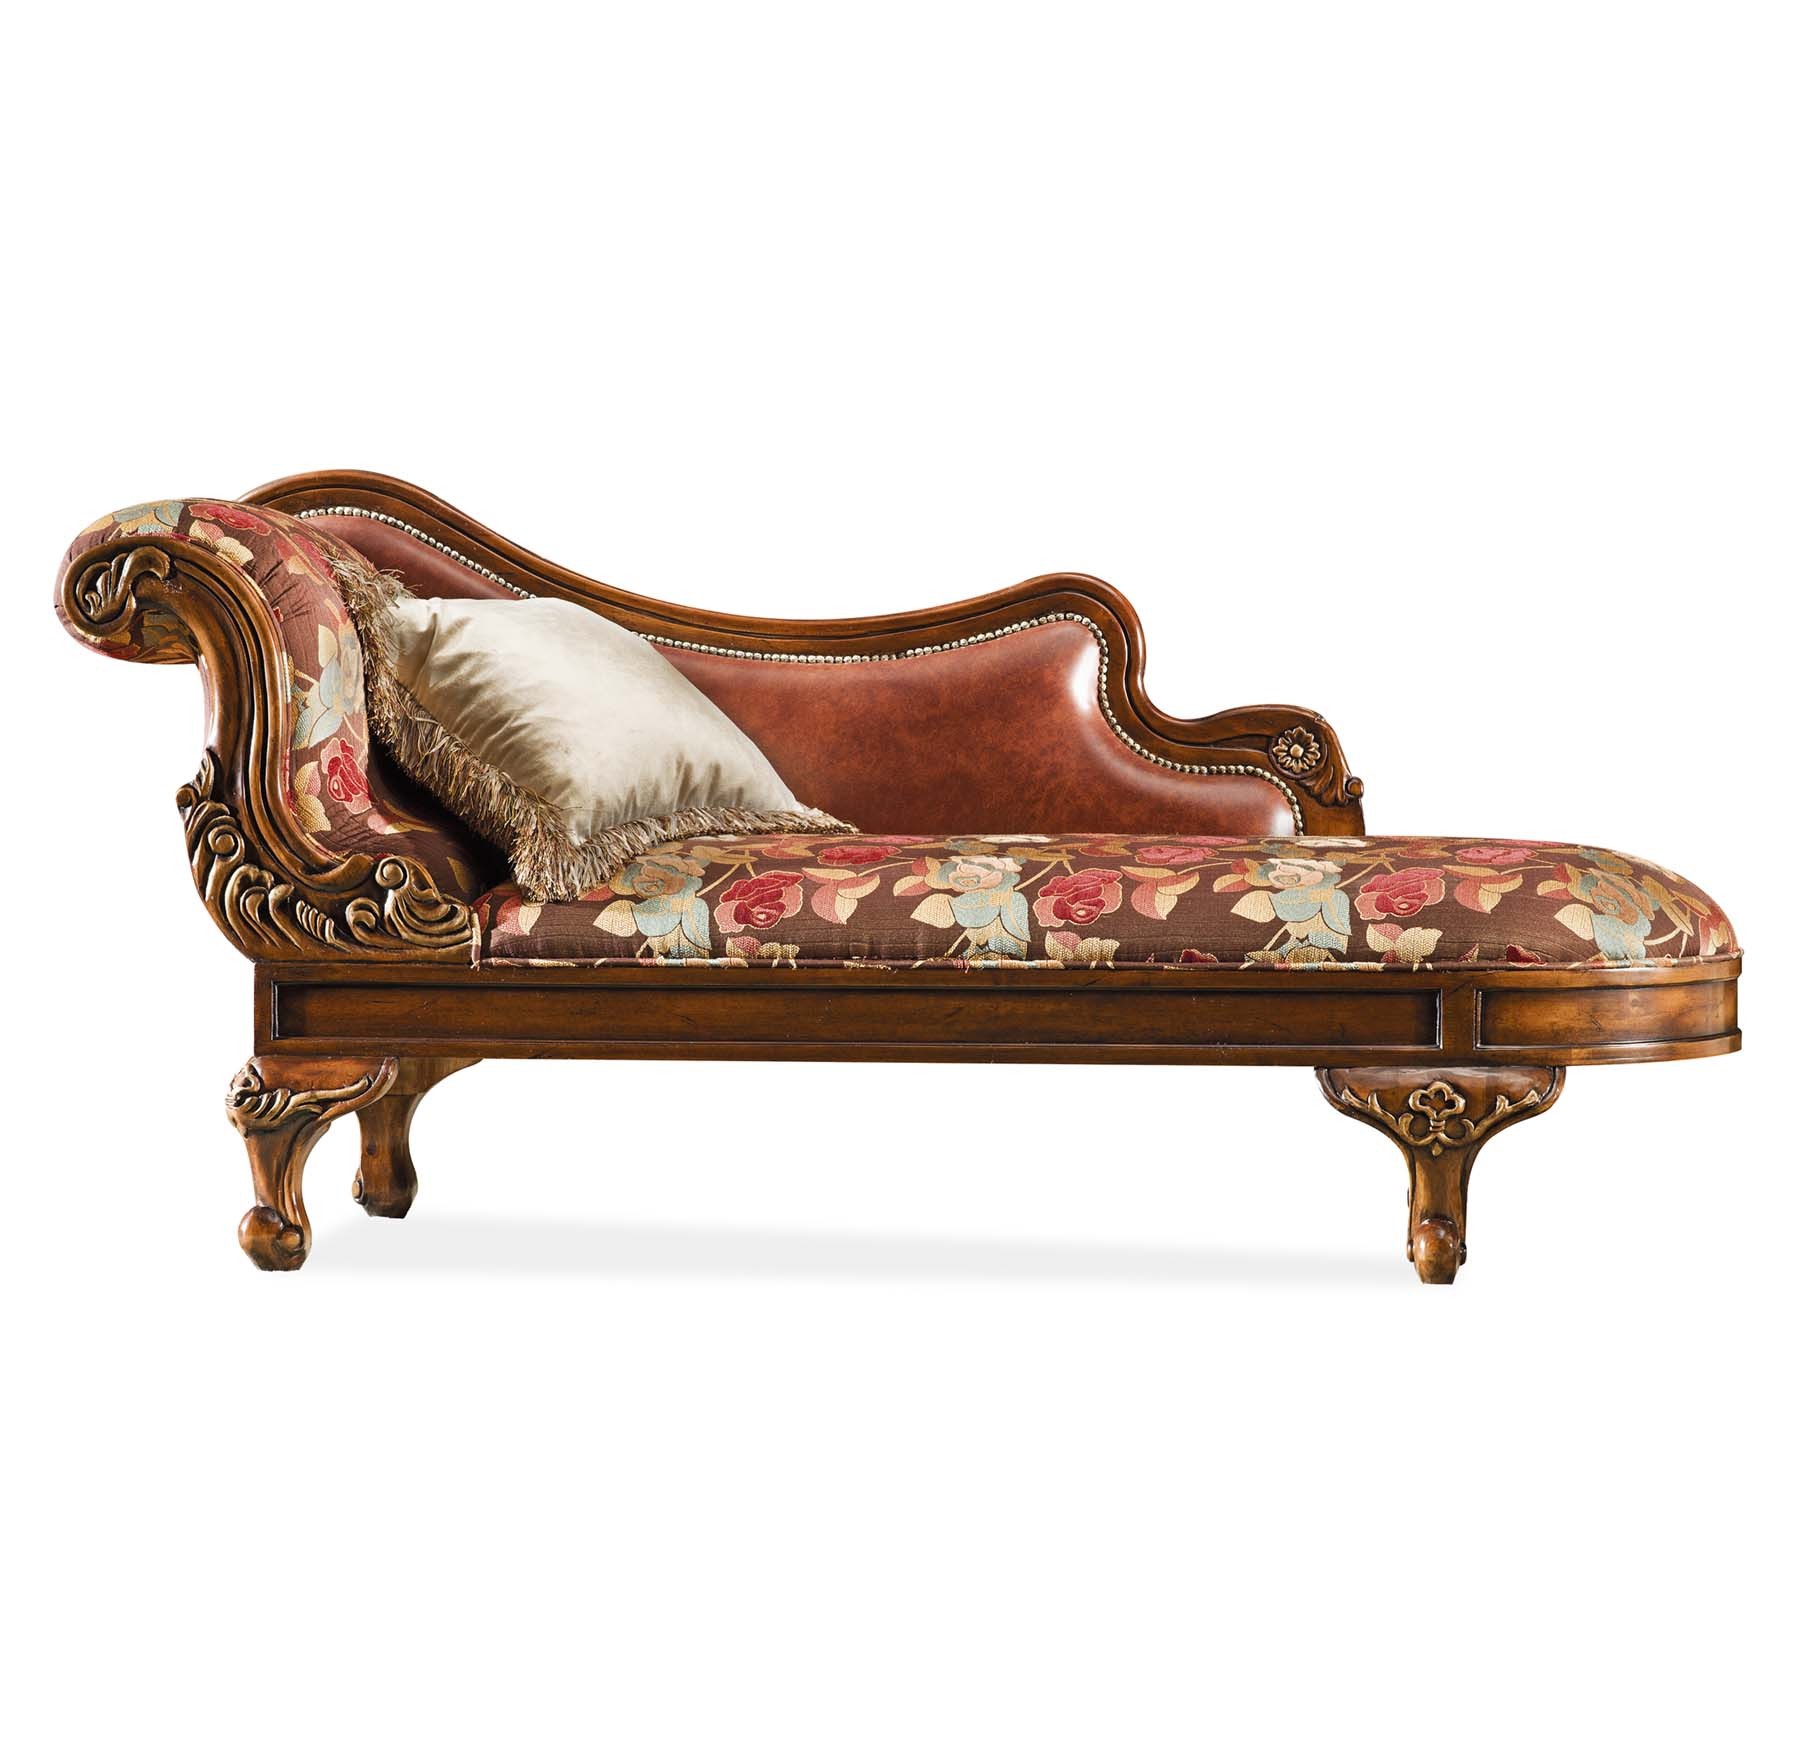 Antique Chaise Lounge Chairs